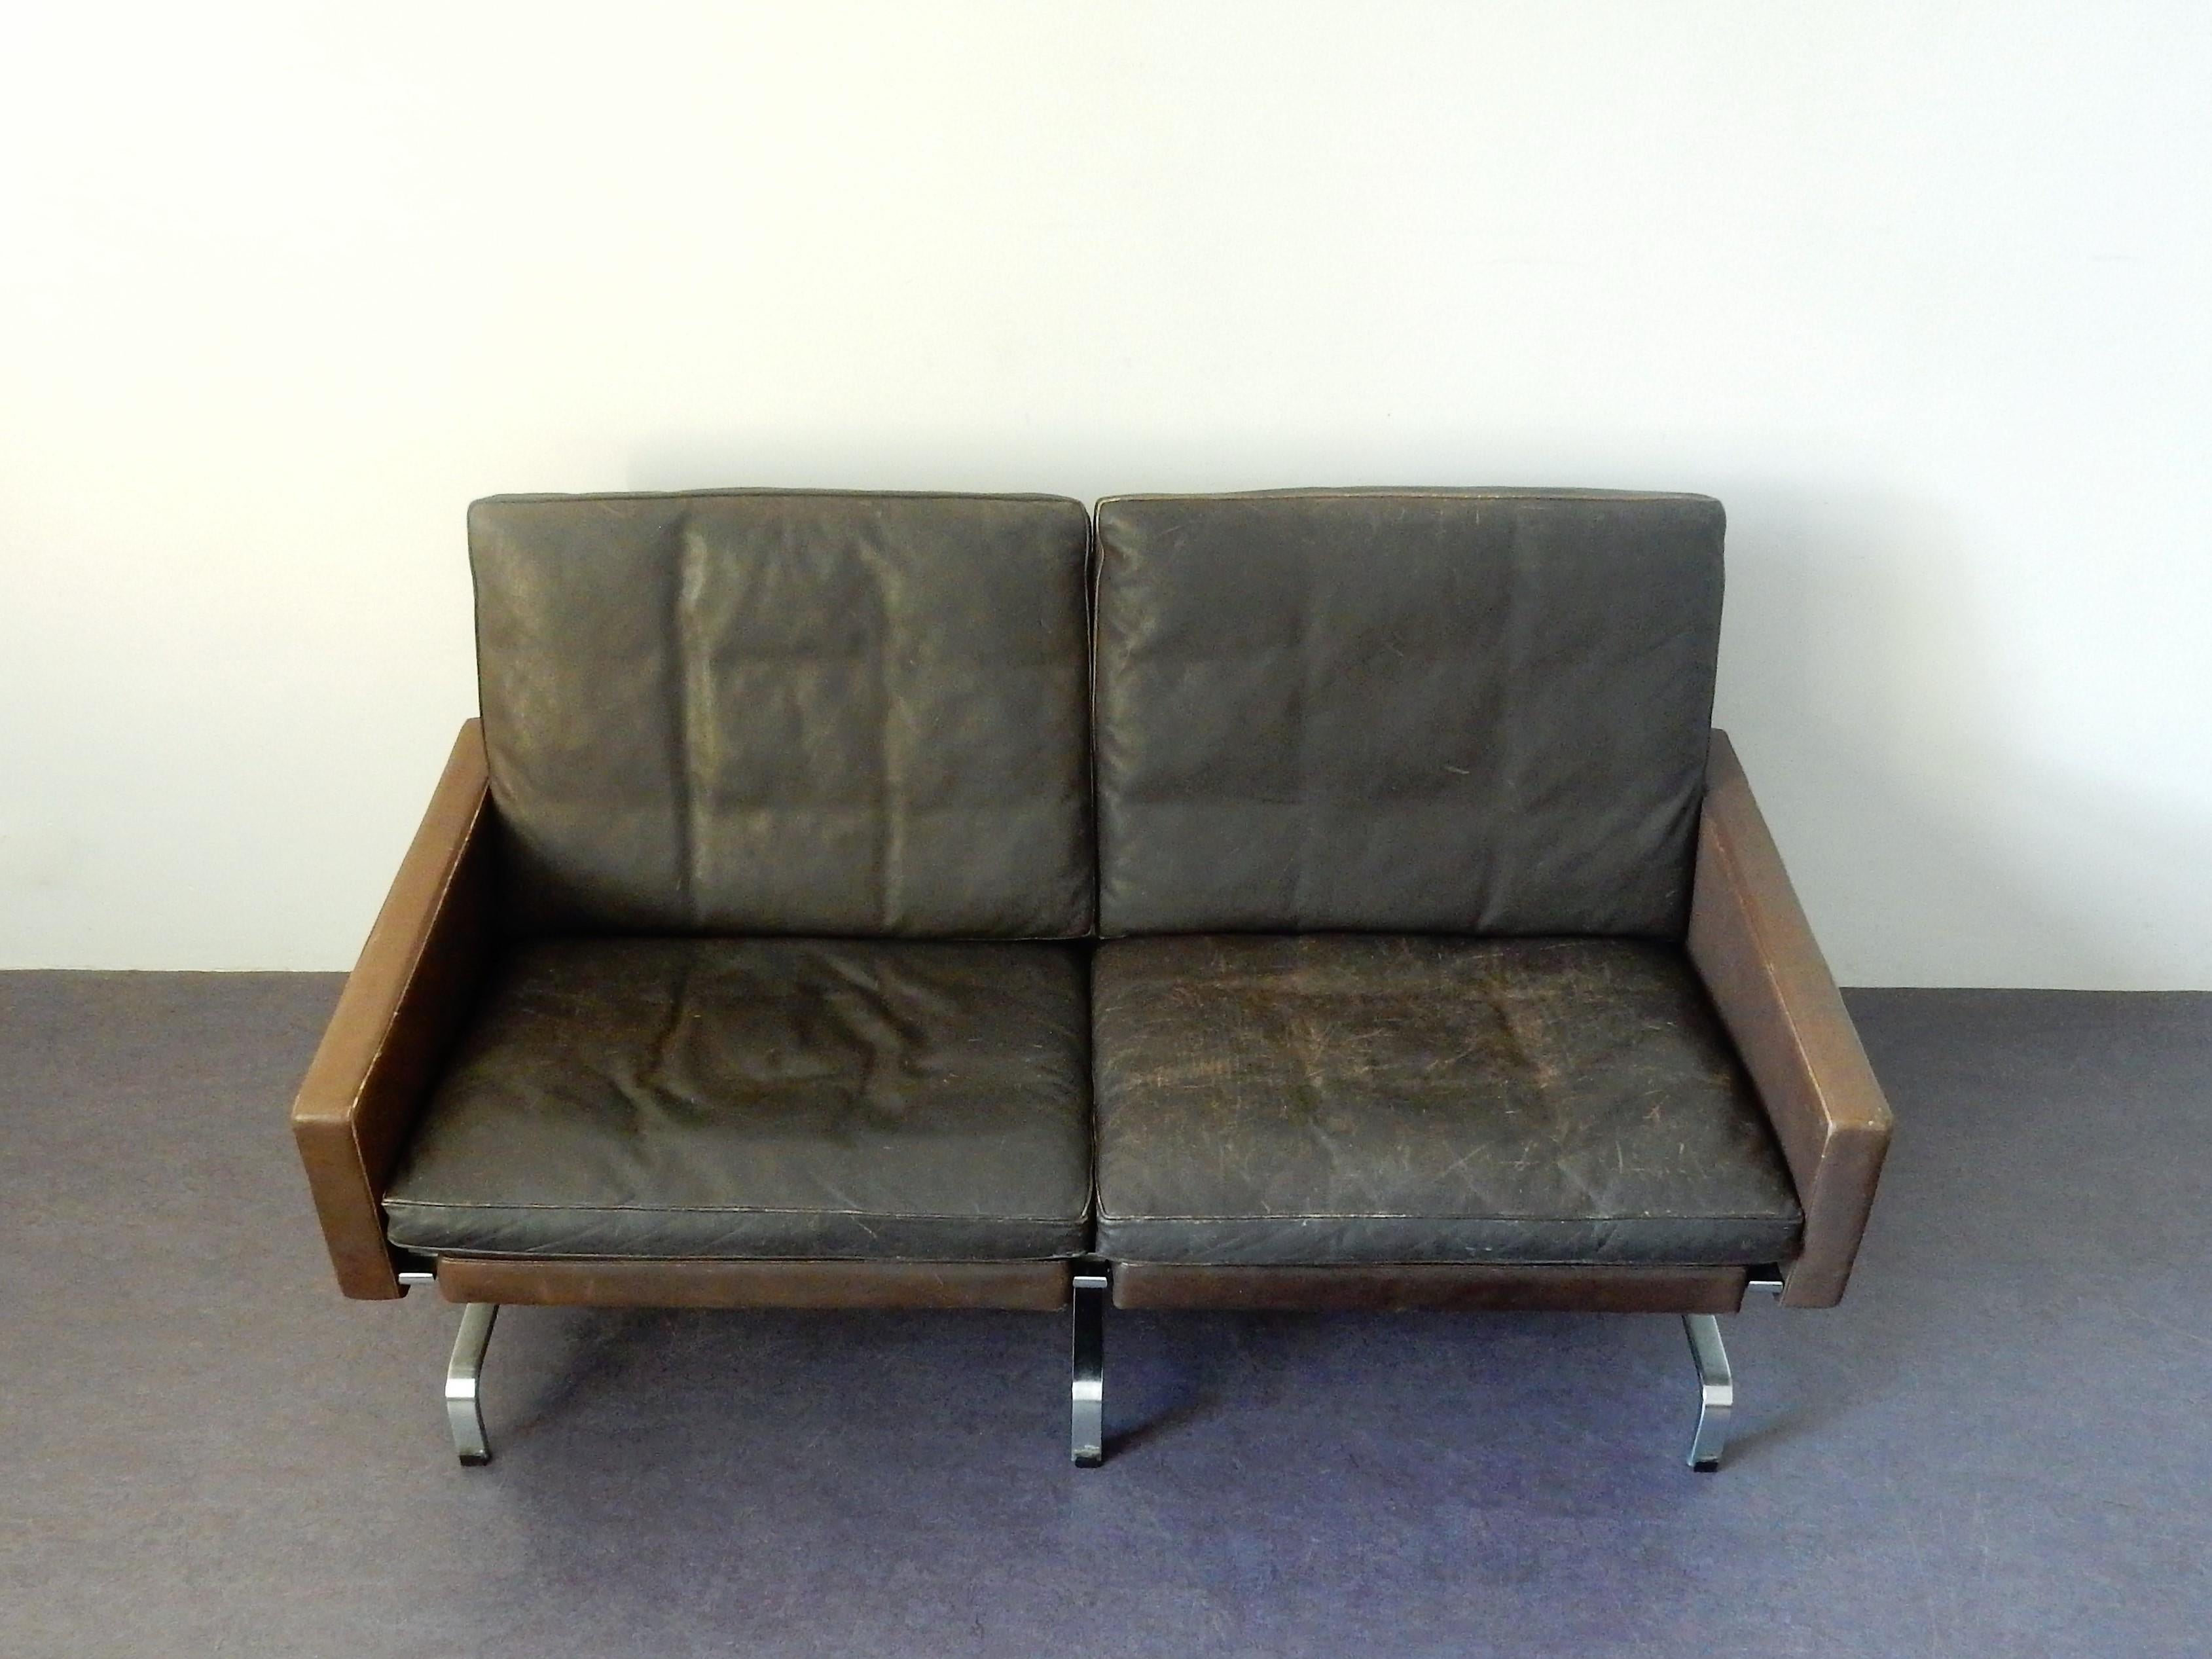 This sofa was once placed in a bank building in Denmark. It is completely original and marked with the original marking of E. Kold Christensen on the bottom bar.
The dark brown leather has a great patina that shows age and use and tells the story of